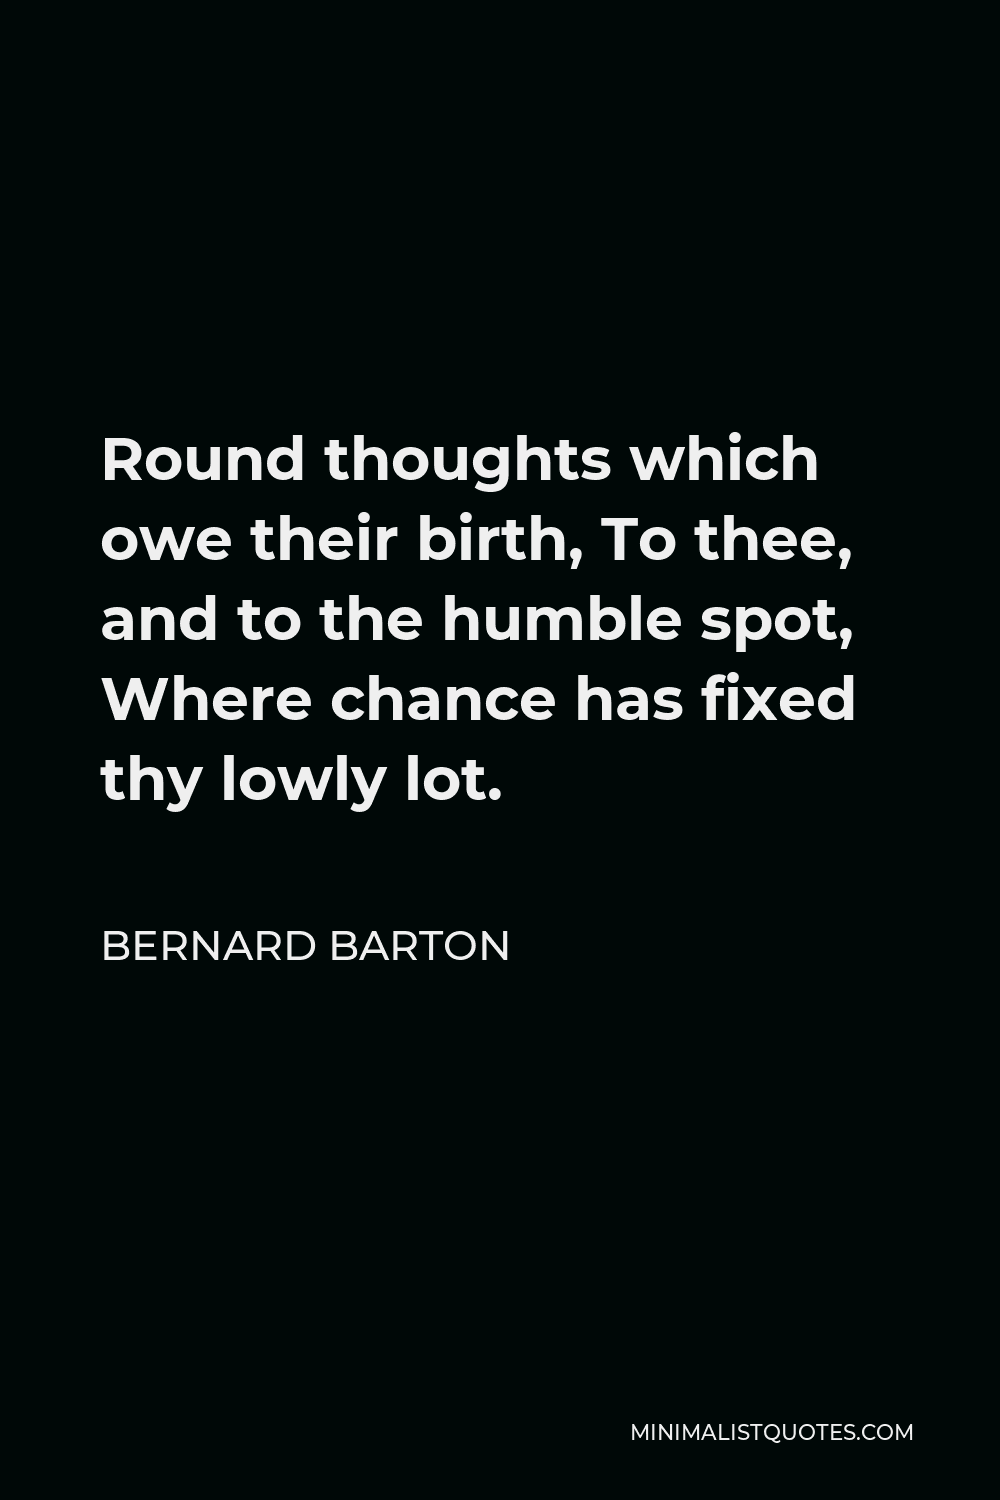 Bernard Barton Quote - Round thoughts which owe their birth, To thee, and to the humble spot, Where chance has fixed thy lowly lot.